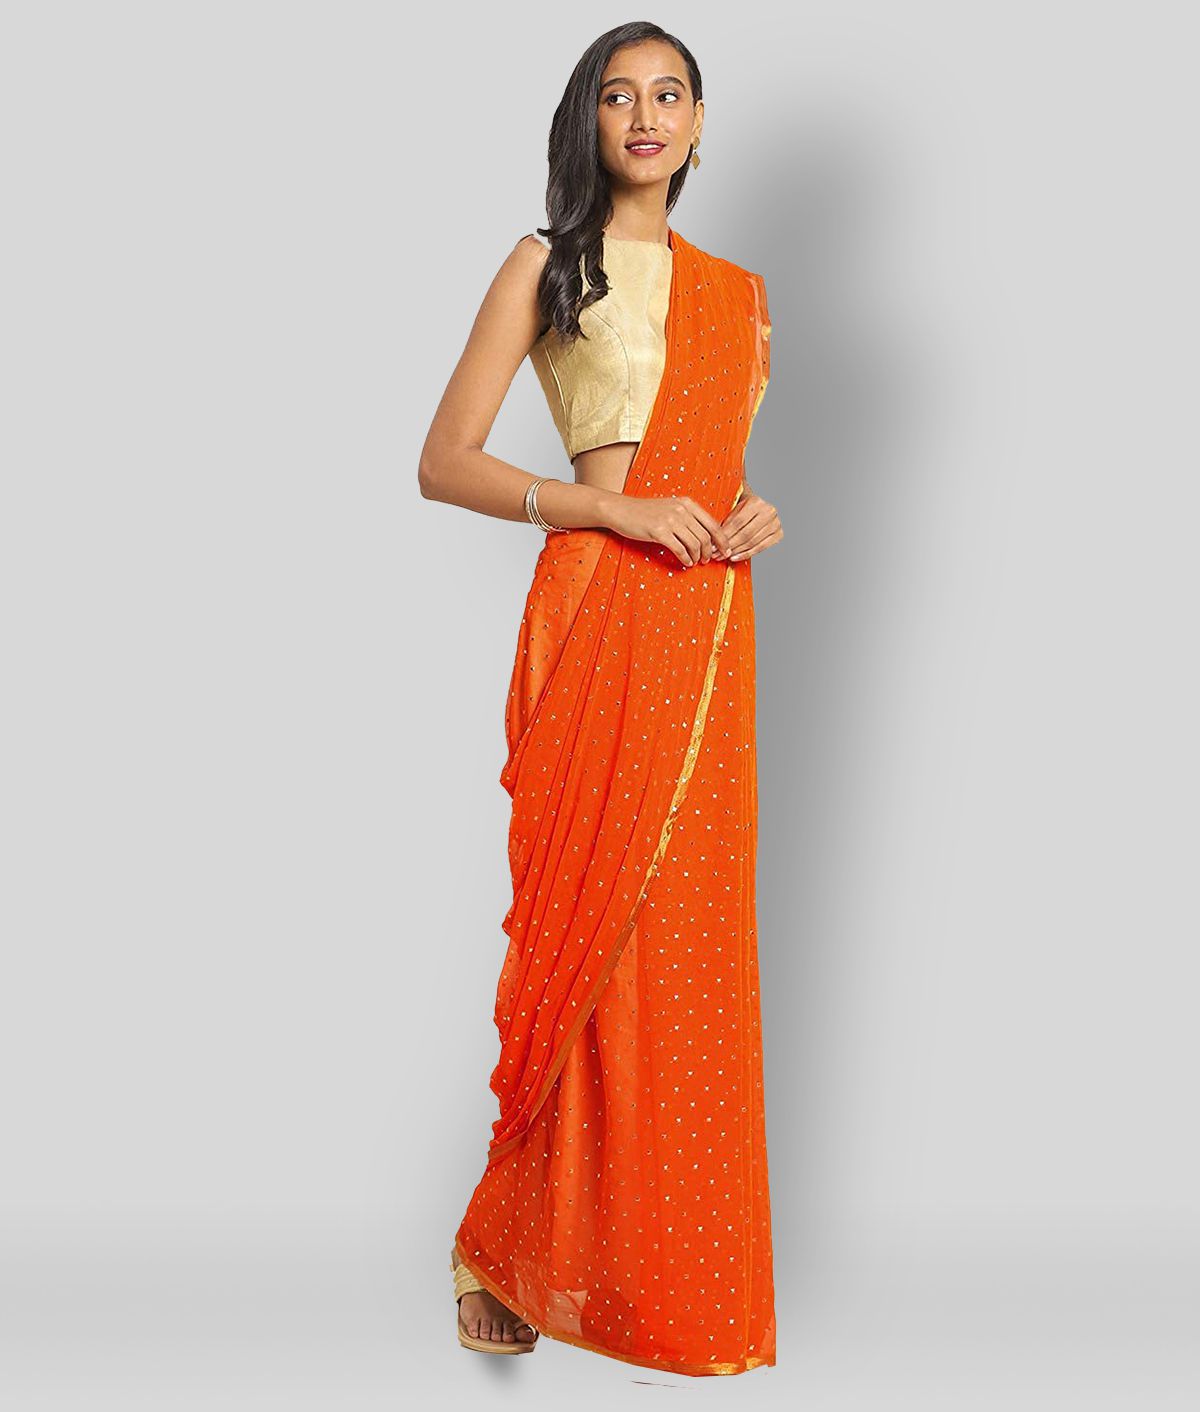     			Bhuwal Fashion - Orange Georgette Saree With Blouse Piece ( Pack of 1 )